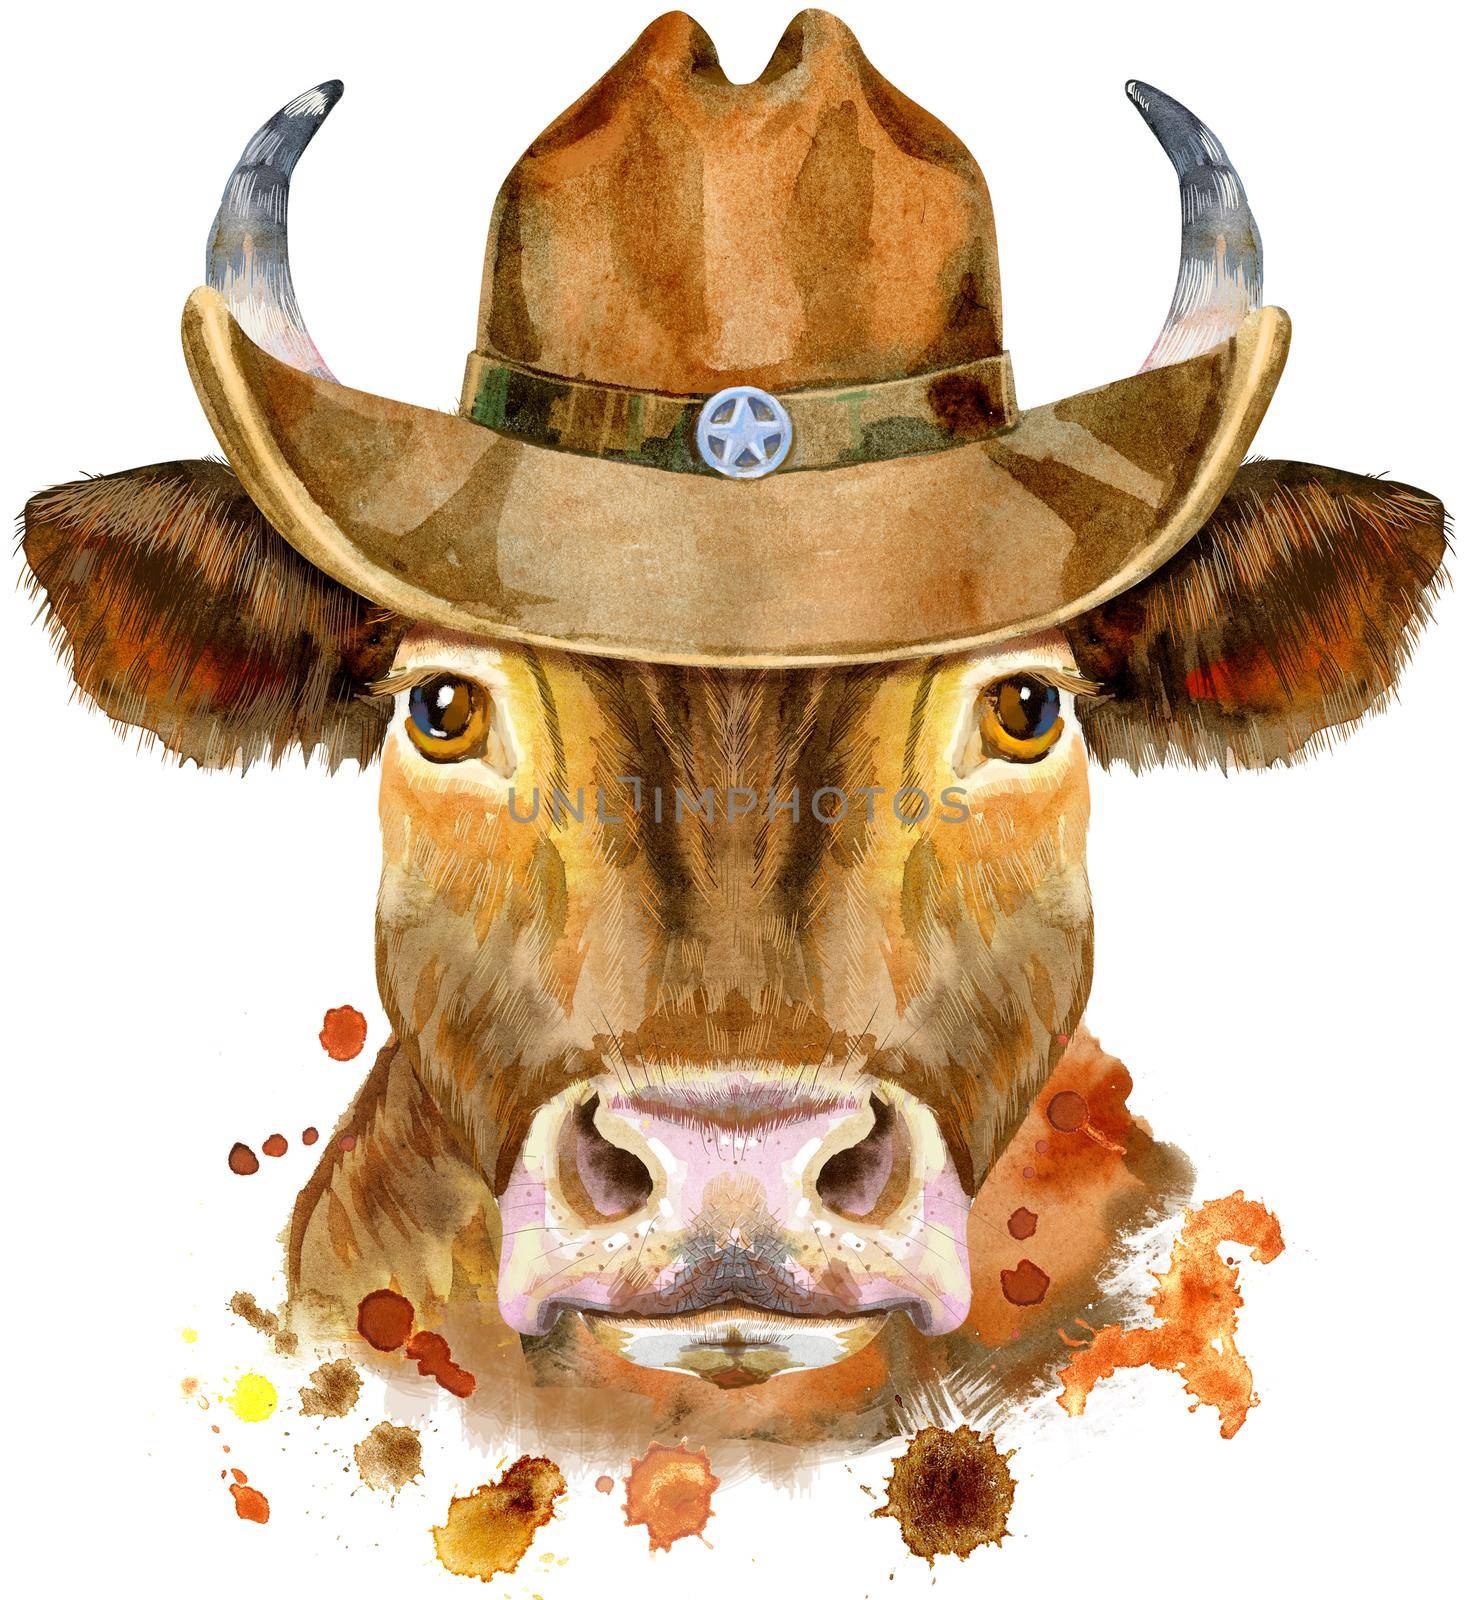 Watercolor illustration of a red bull in a cowboy hat by NataOmsk